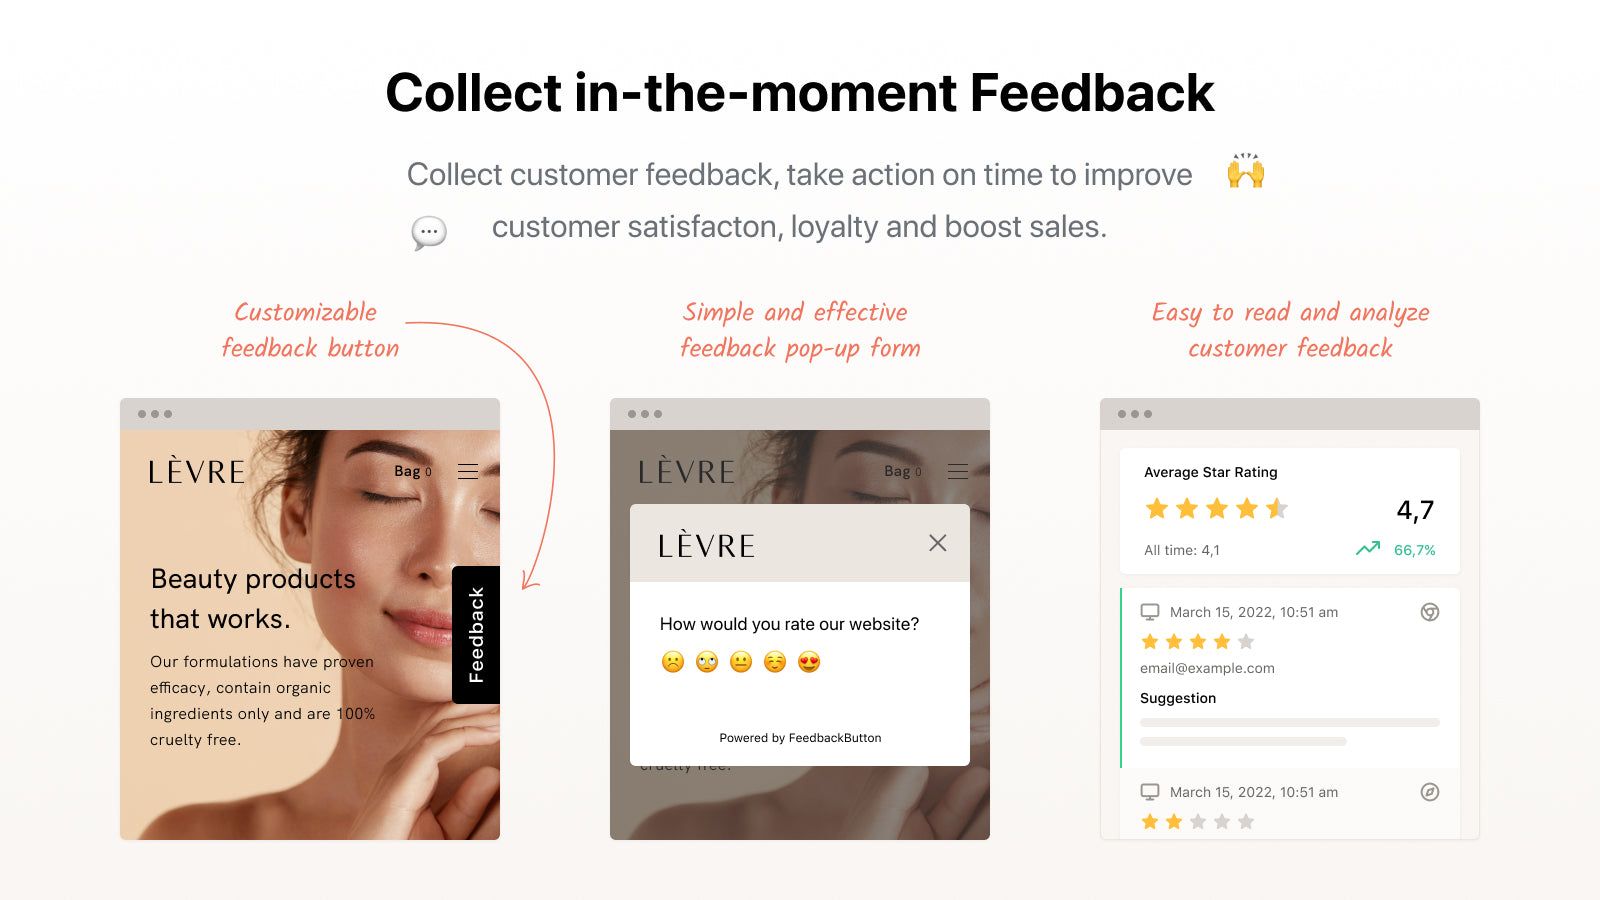 Collect in-the-moment Feedback